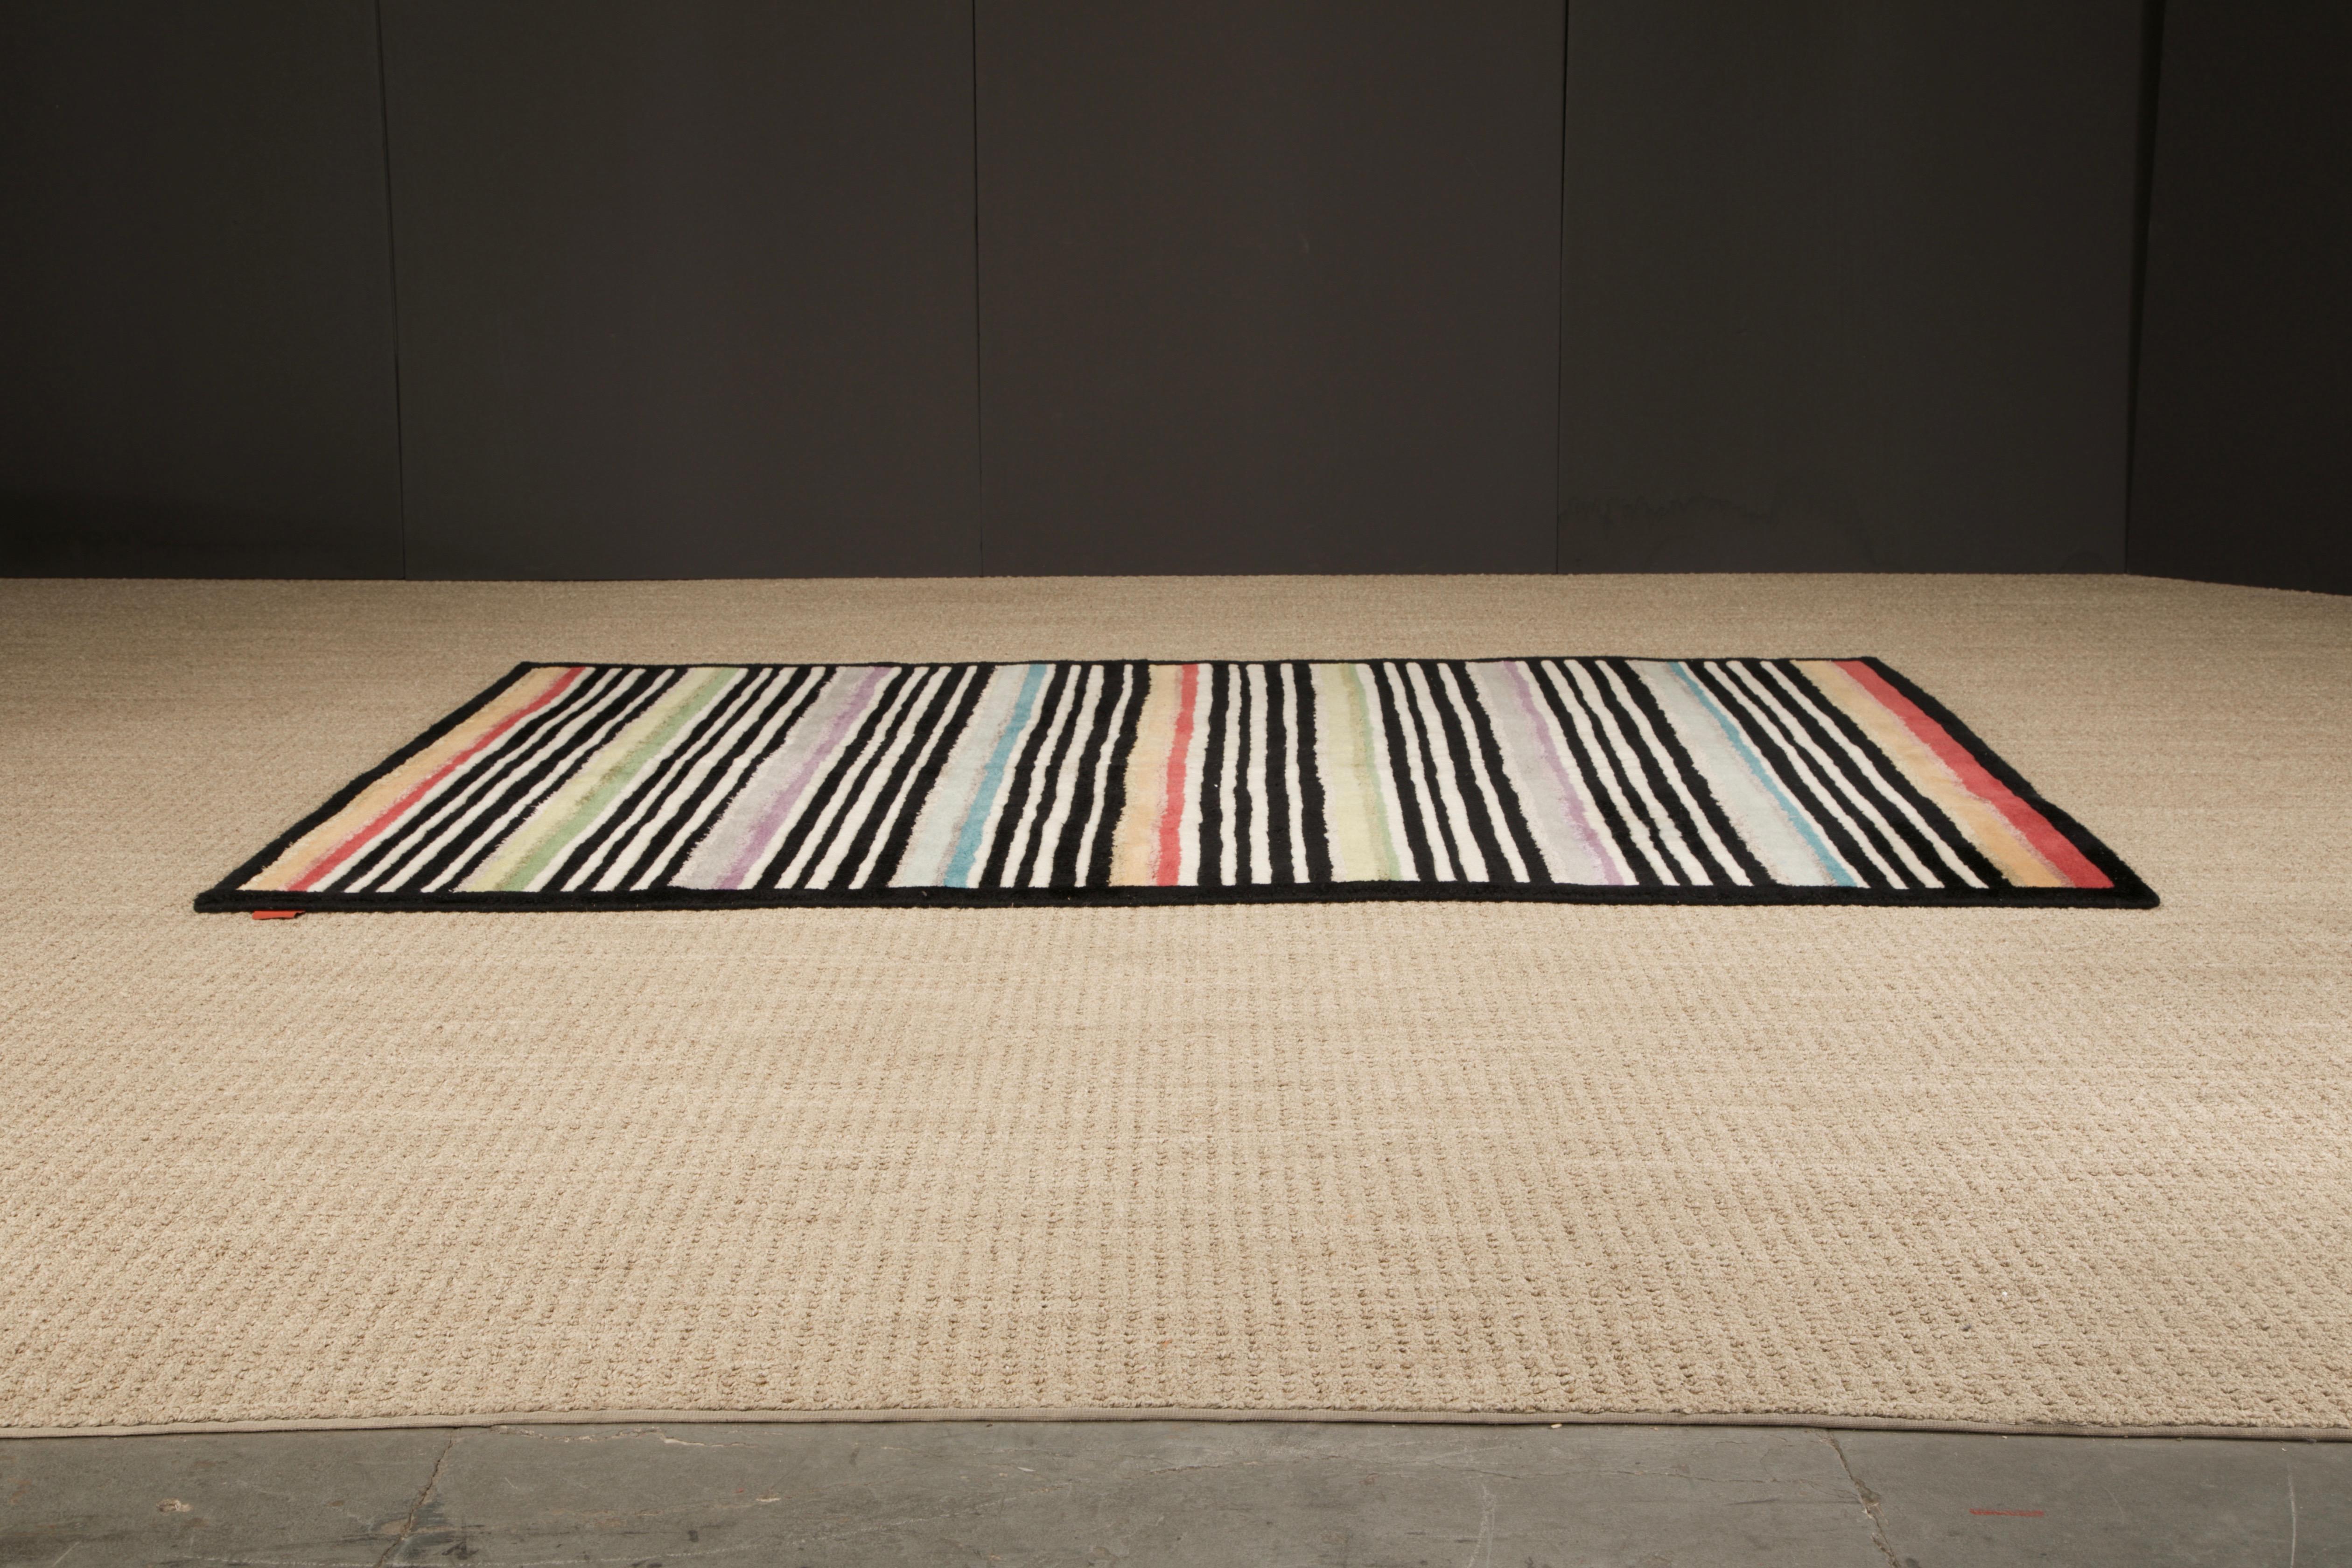 Attention interior designers, this is the large rug you need for that high-profile cover-worthy room you're working on. This signed Missoni rug is from the 1980s Italy and in an oh-so-on-trend Post-Modern design featuring classic Missoni colors in a